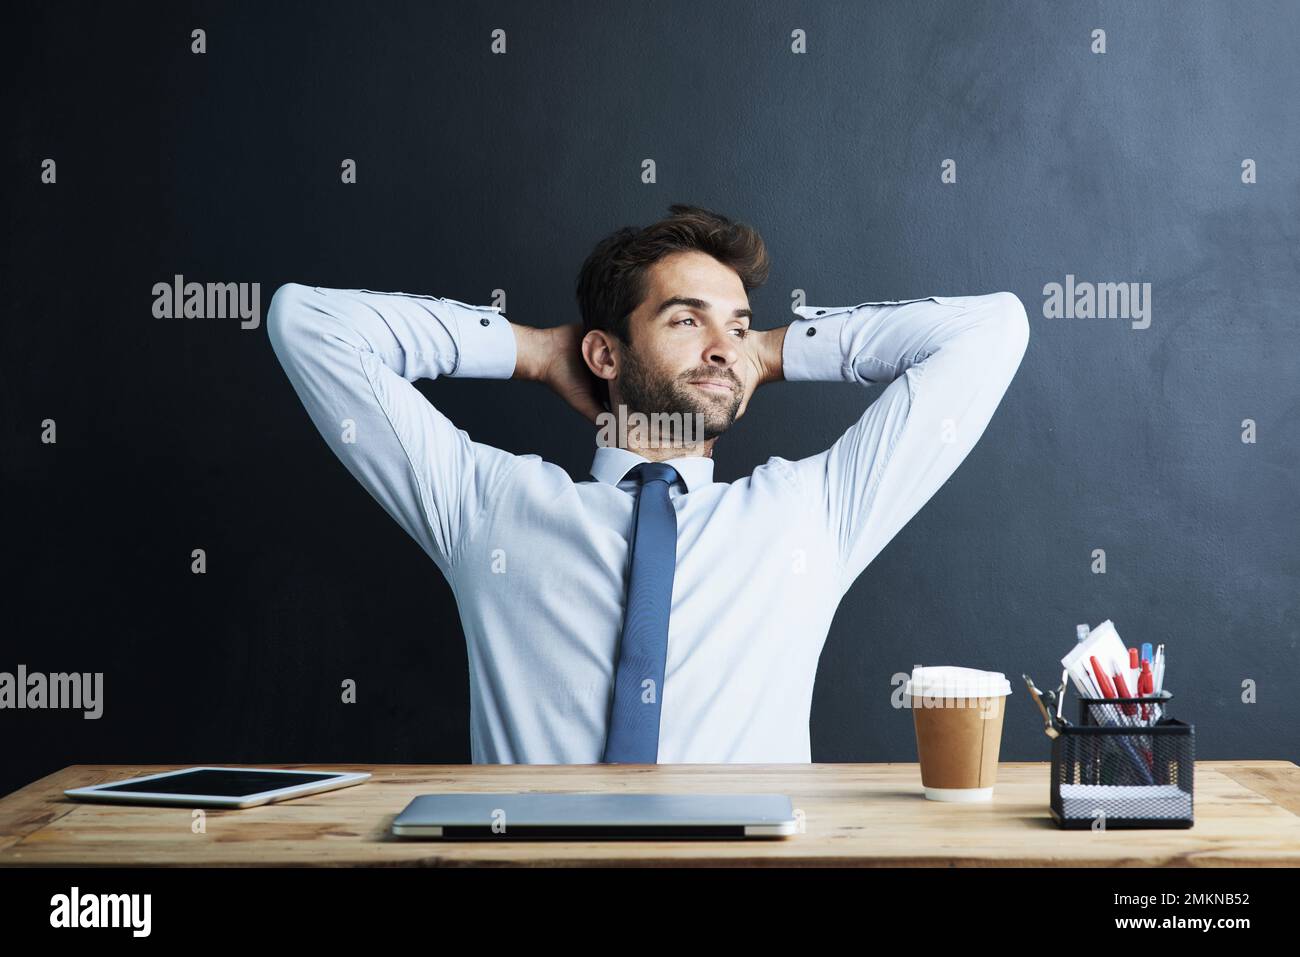 Dreaming about success. a young corporate businessman sitting at a desk against a dark background. Stock Photo